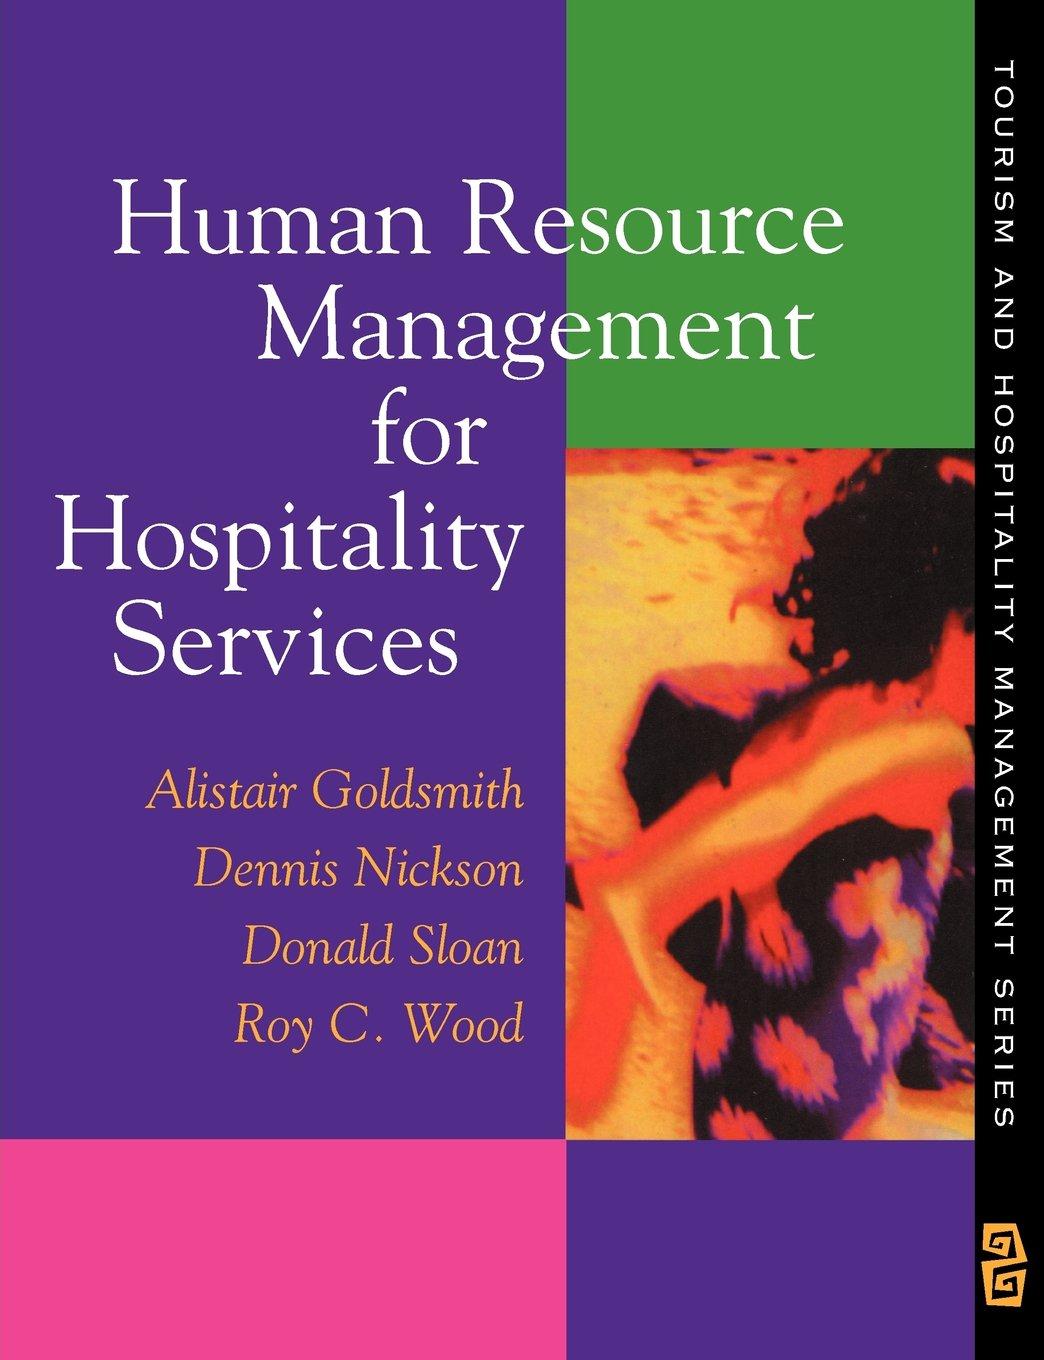 human resource management for hospitality services 1st edition alistair goldsmith, dennis nickson, donald